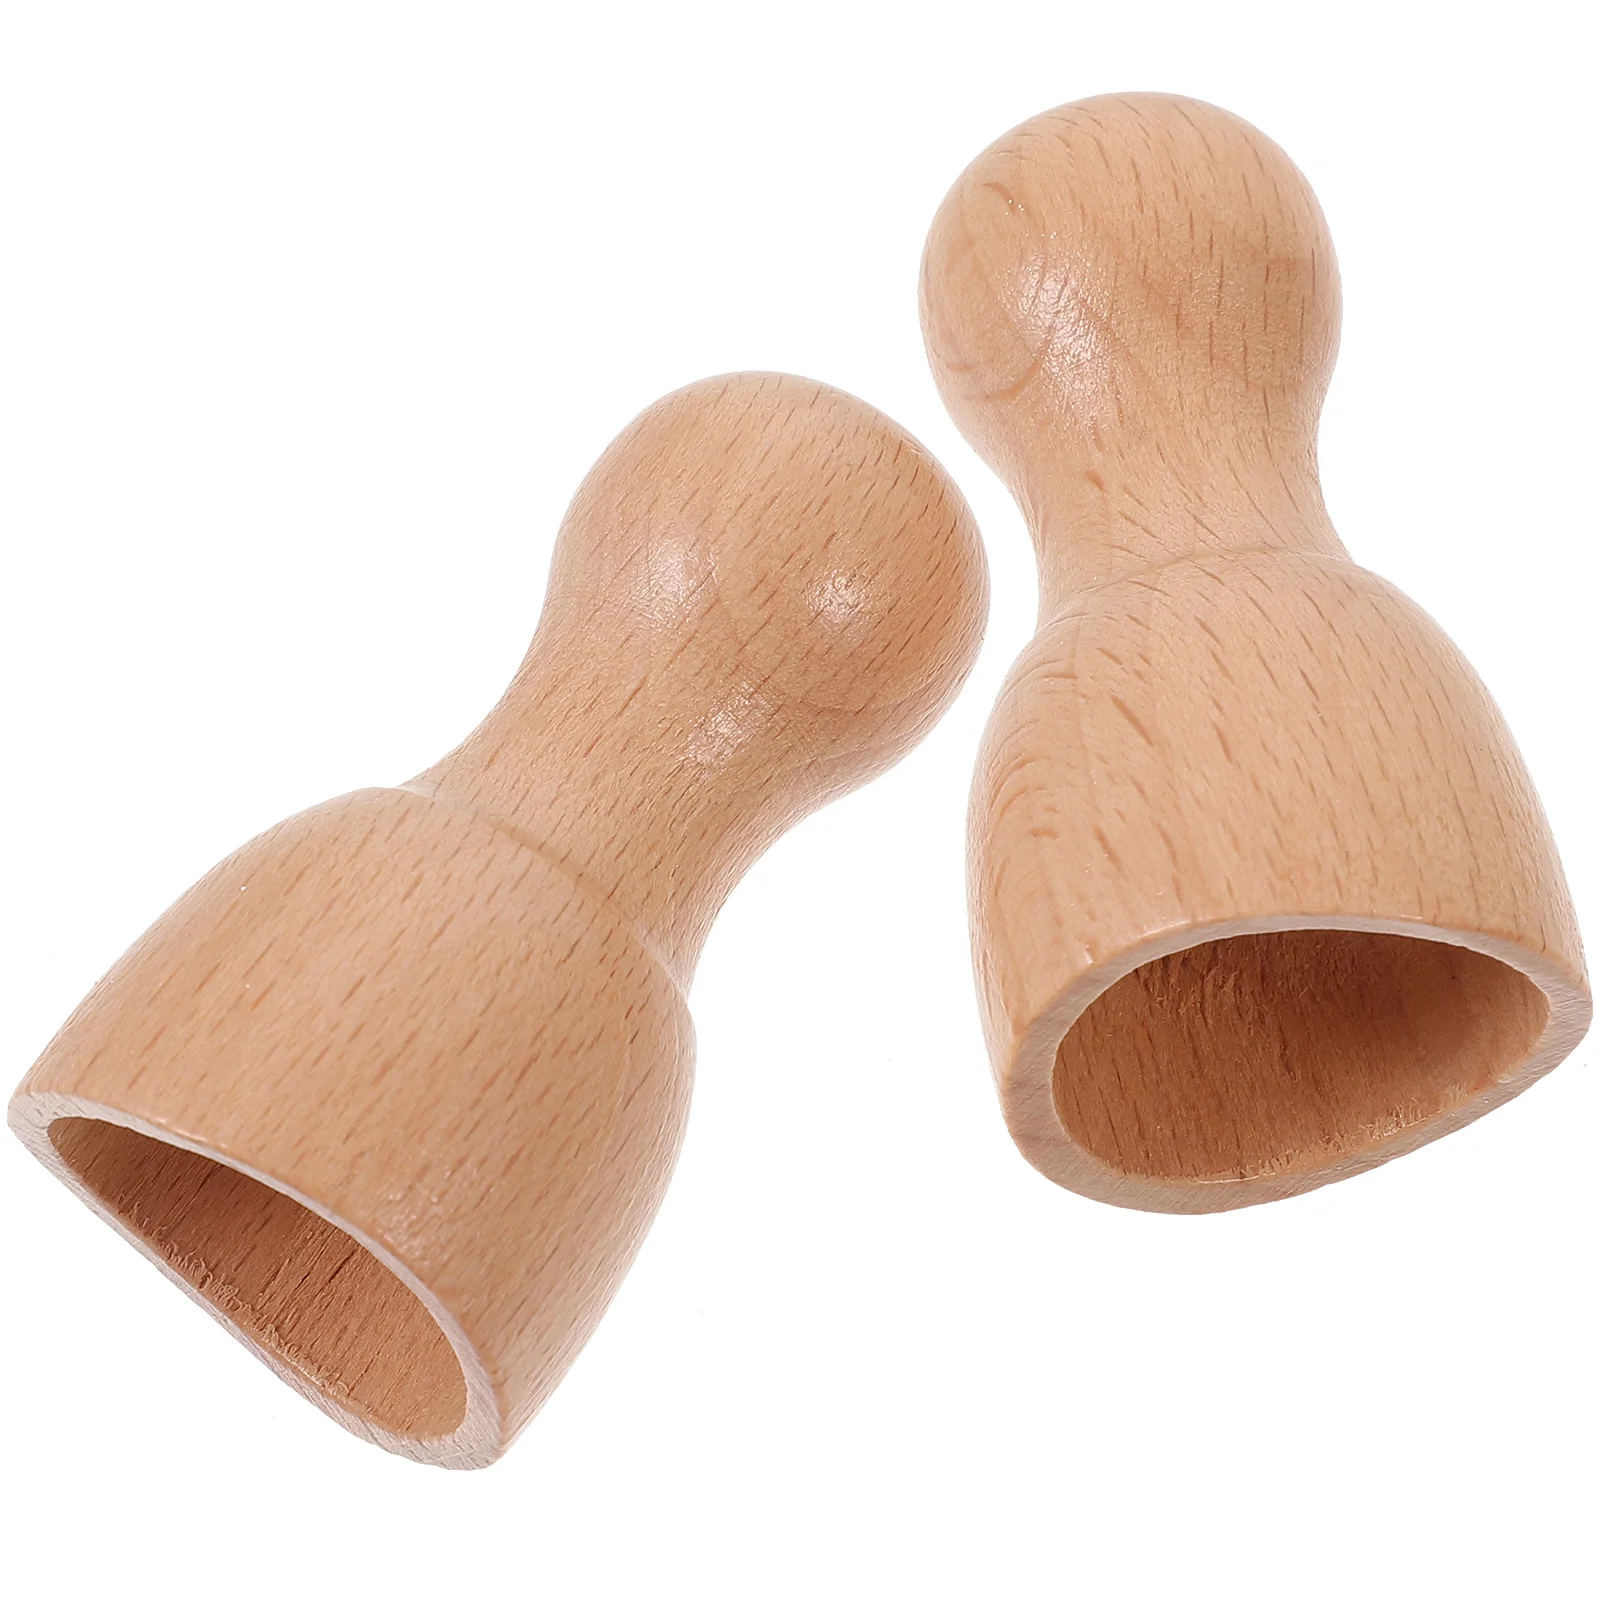 

2 Pcs Compact Massage Cup Wood Body Massager Neck Scraping Tablets/boards Thigh Tool Wooden Shoulder Tools